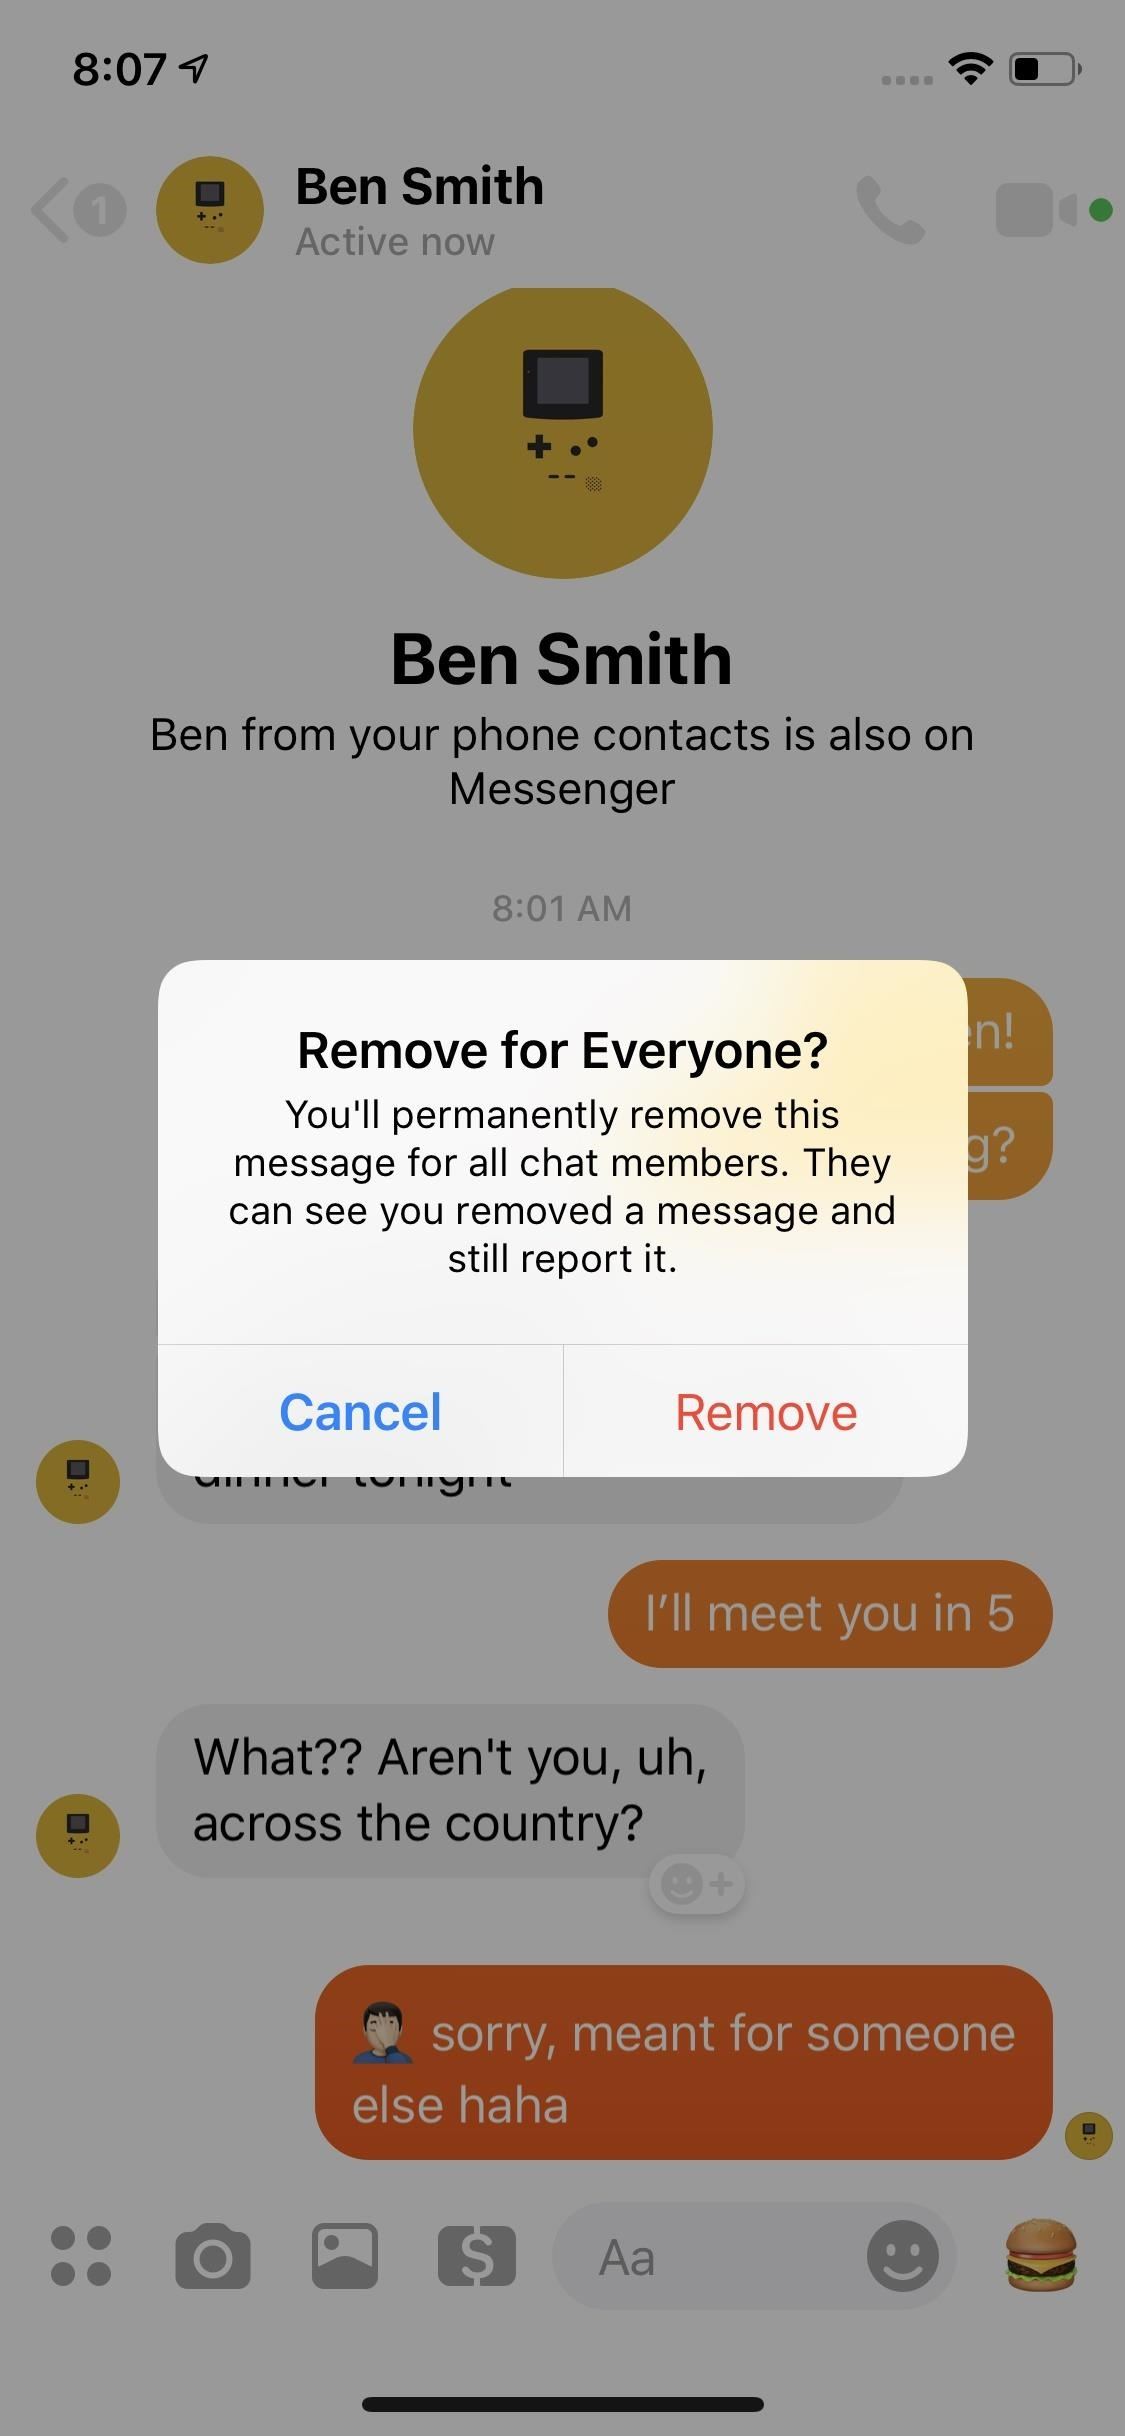 How to Unsend Messages in Facebook Messenger Chats So Your Recipients Can't View Them